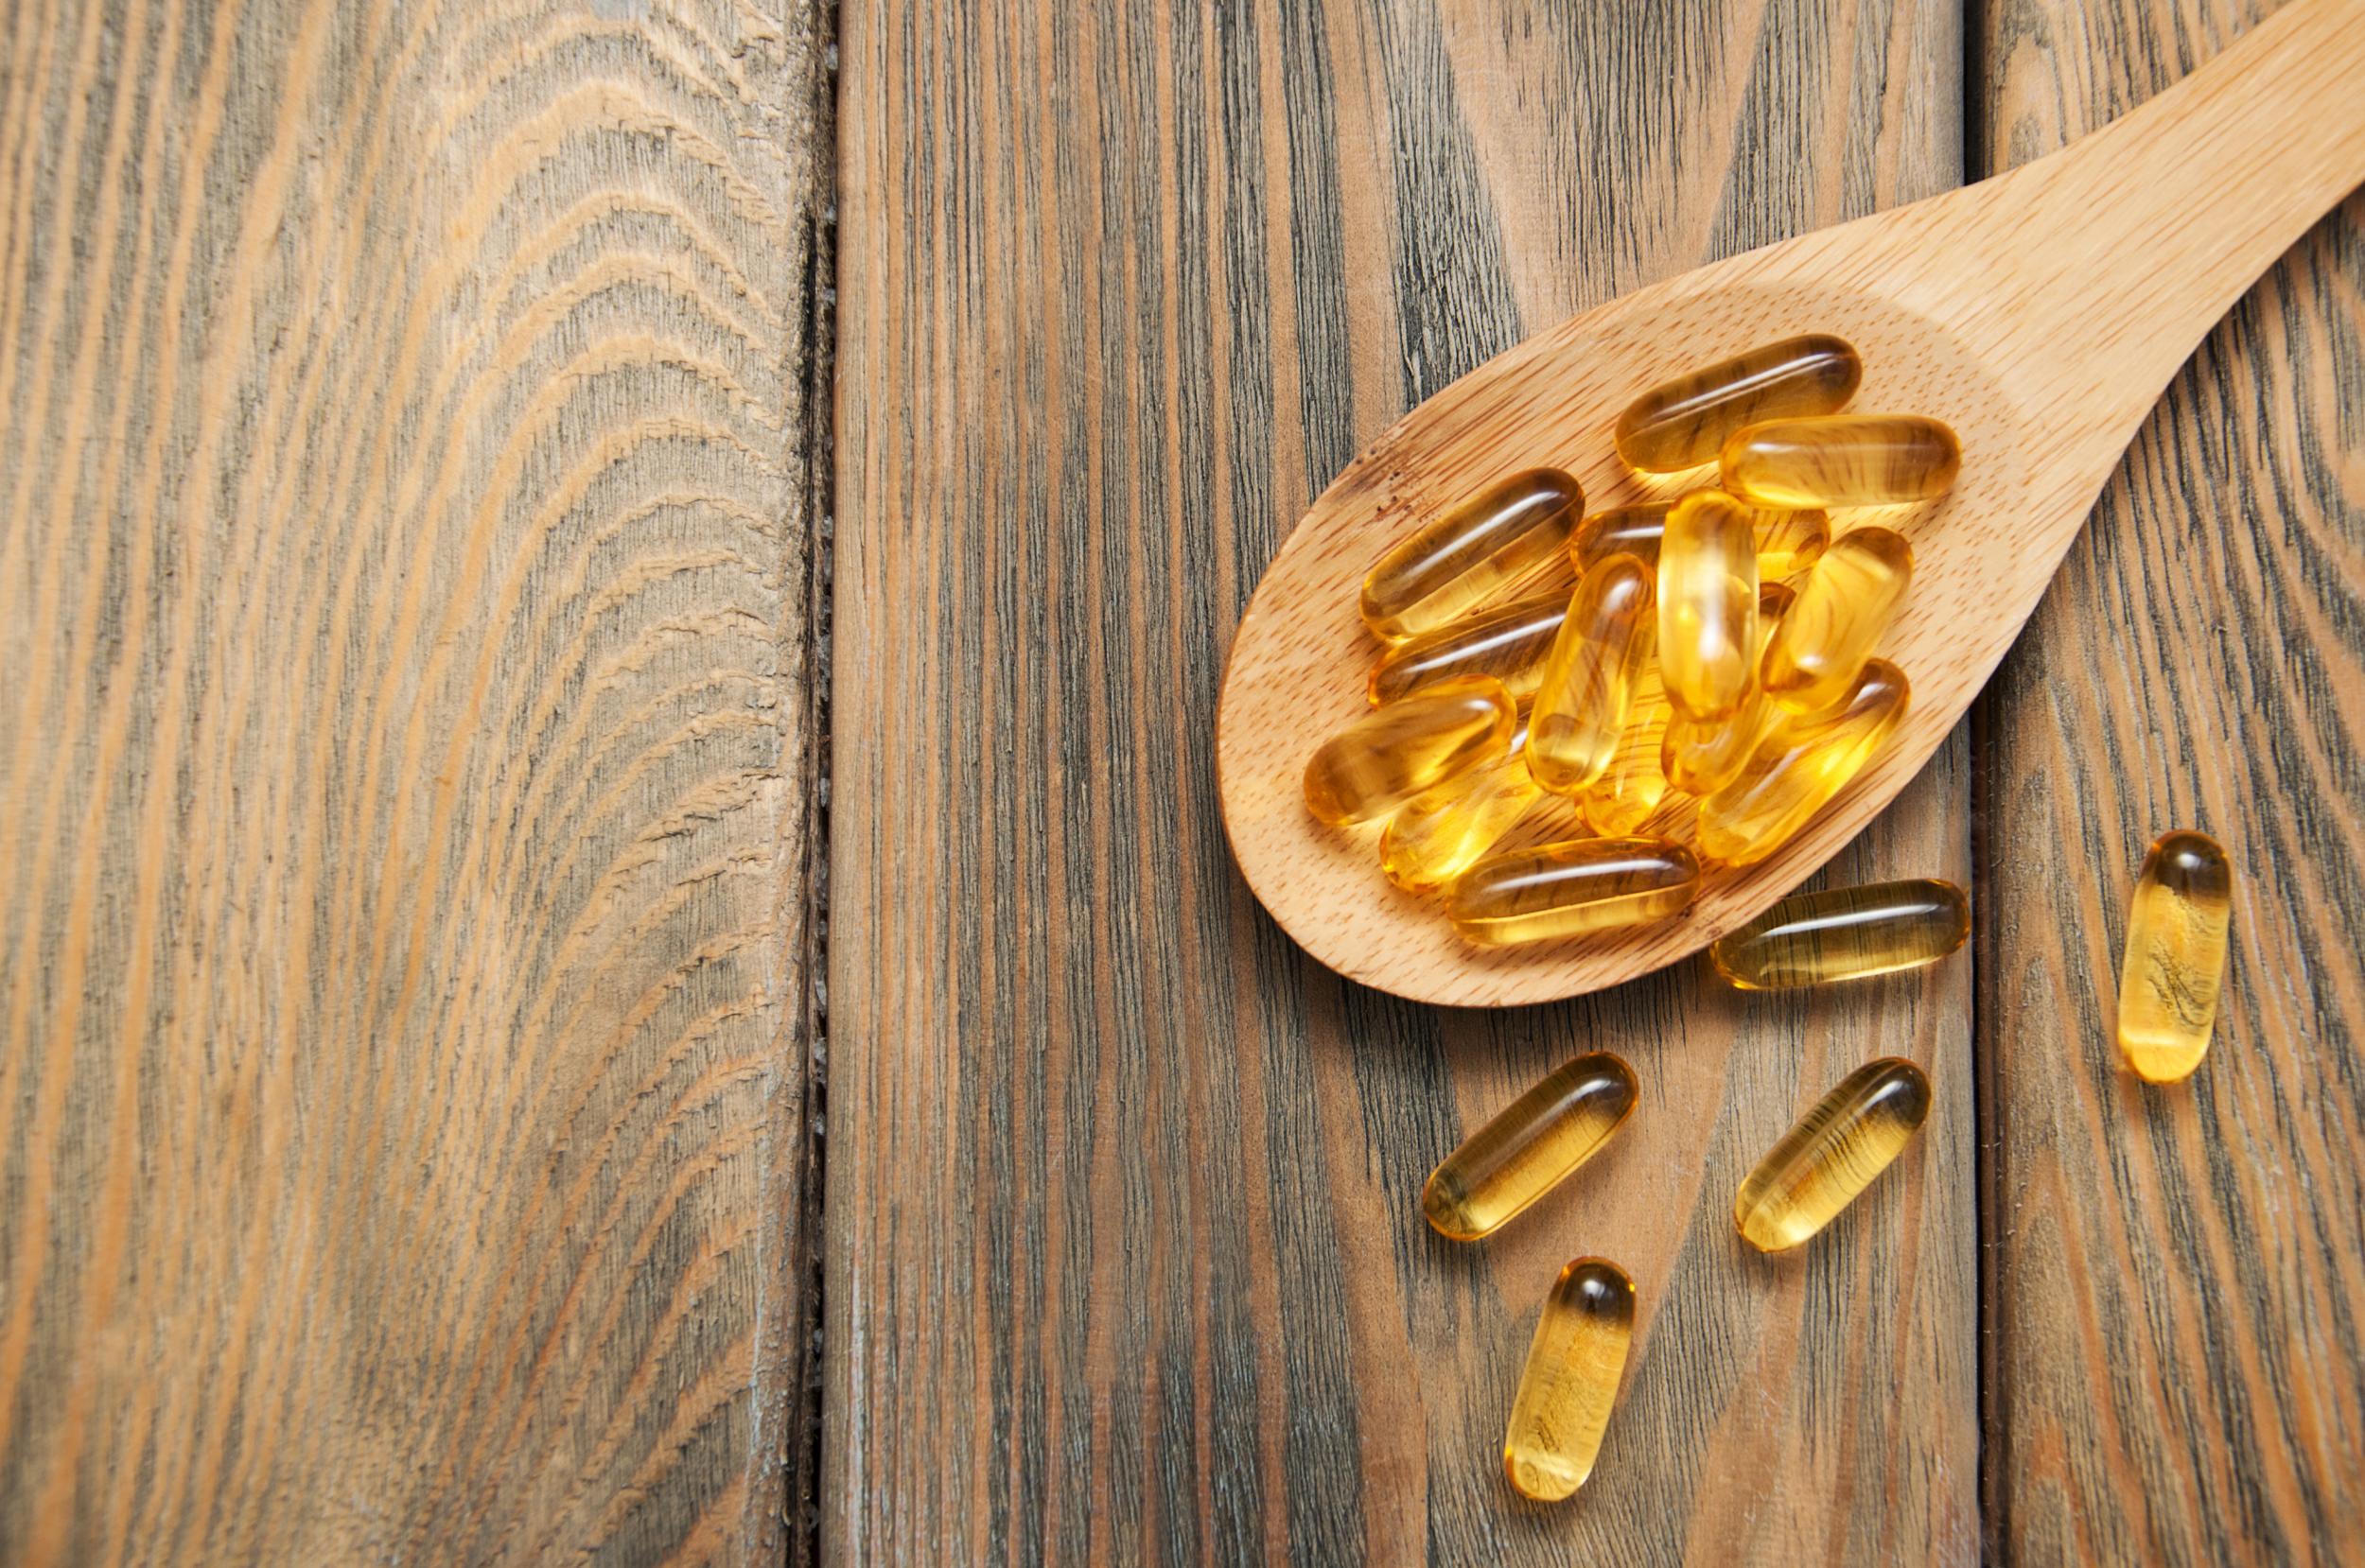 Omega-3 fish oil and probiotic supplements in late pregnancy and breastfeeding appear to have the biggest impact